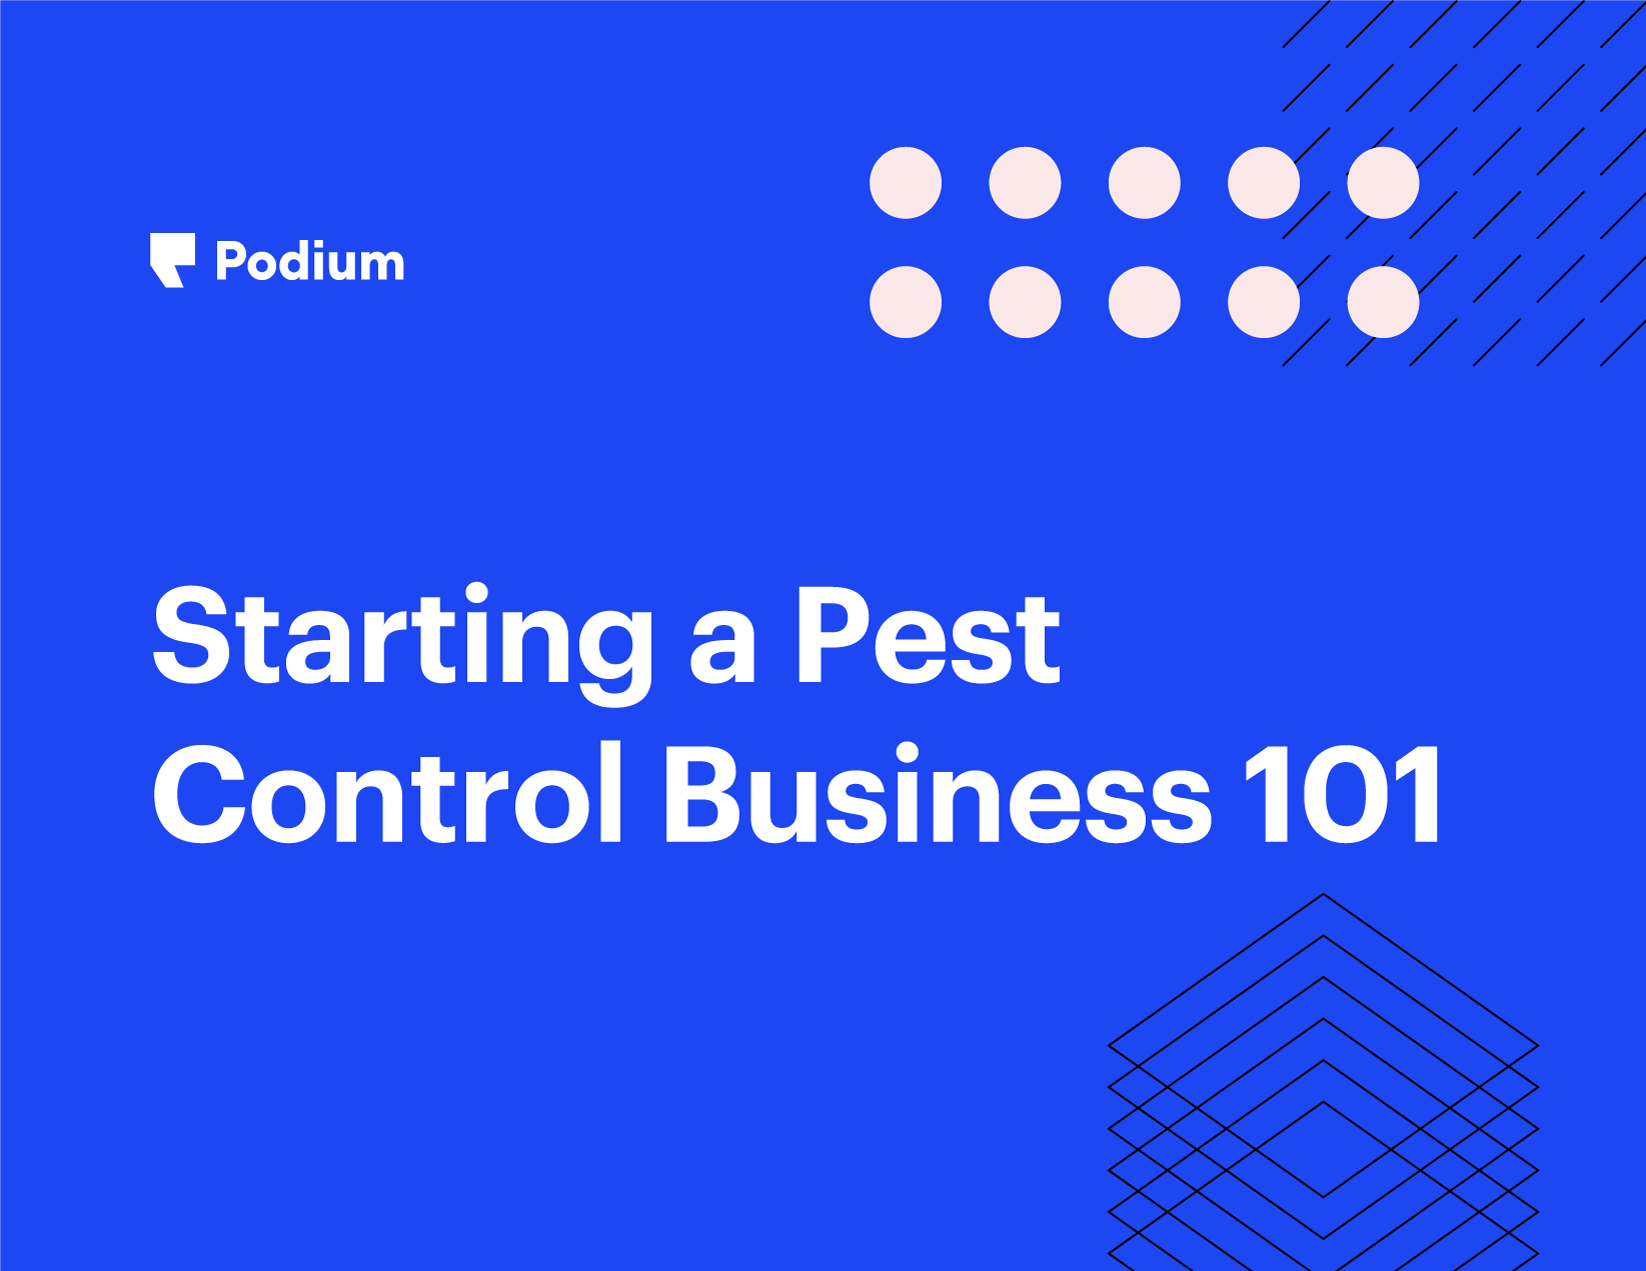 Starting a Pest Control Business 101